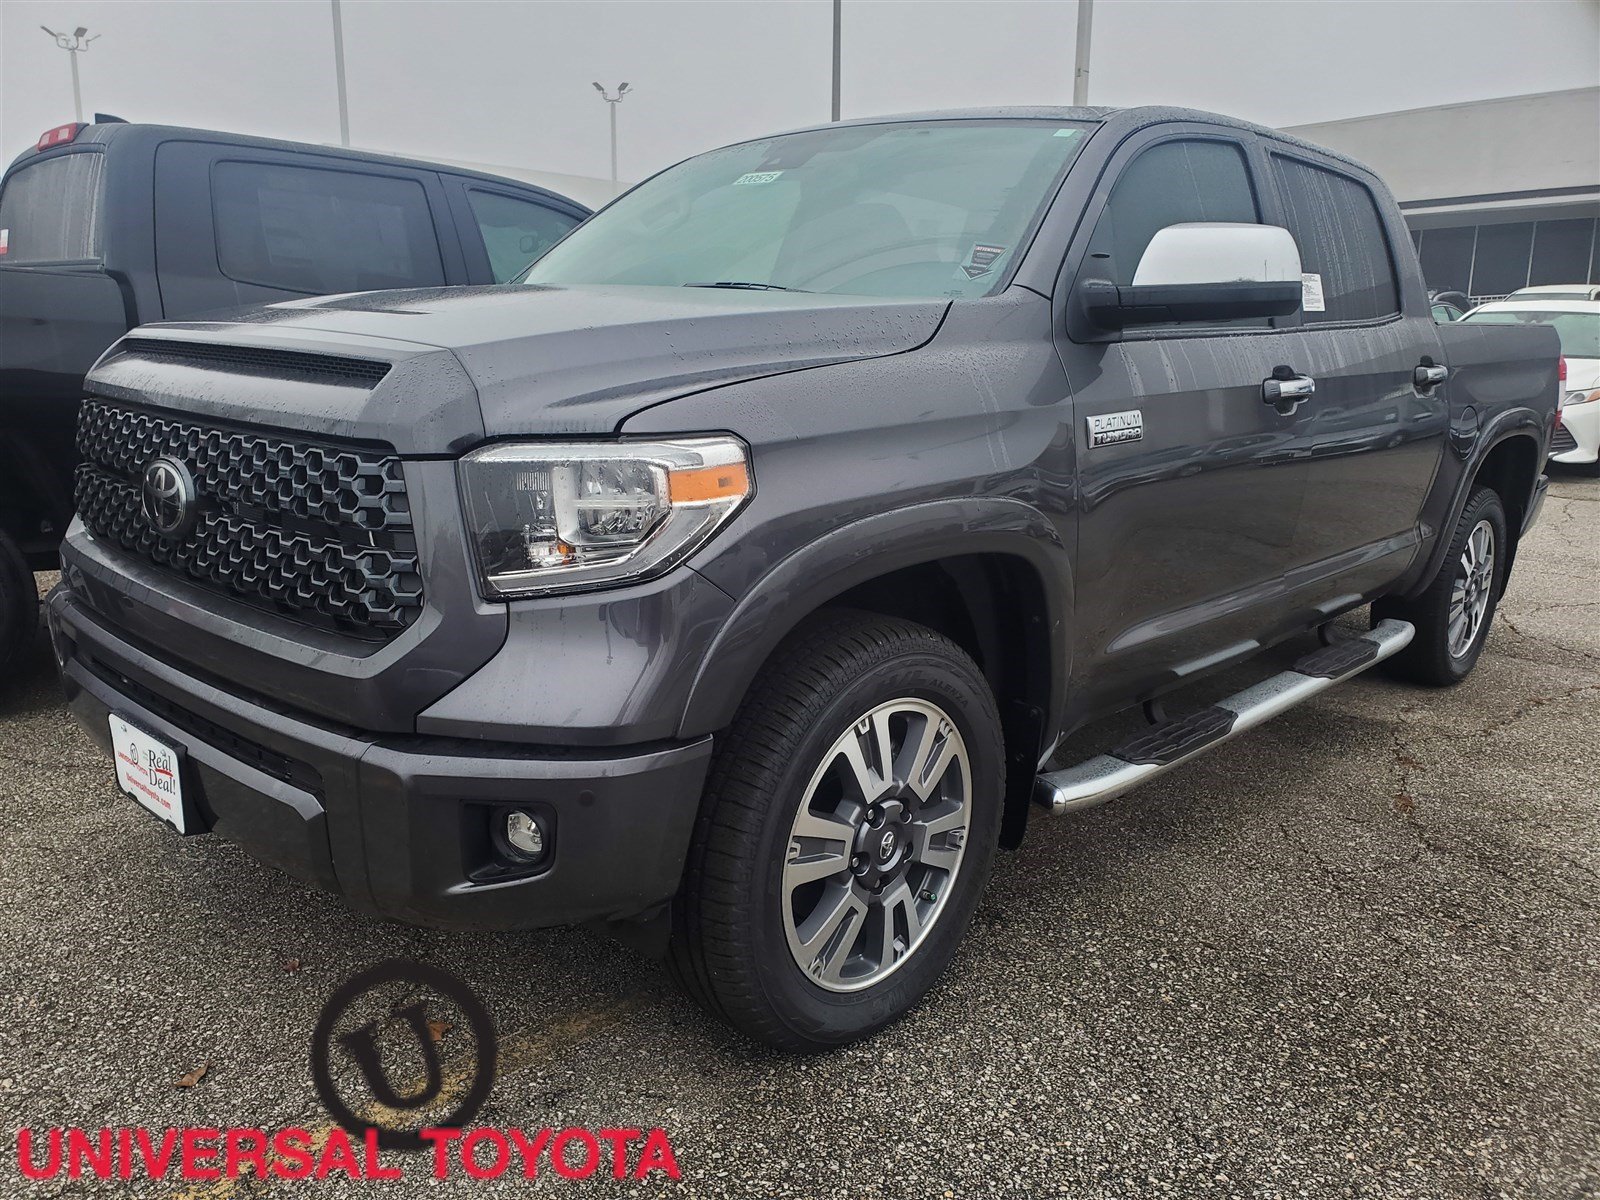 2020 Toyota Tundra 1794 Edition Crewmax 5 5 Bed 5 7l 4wd